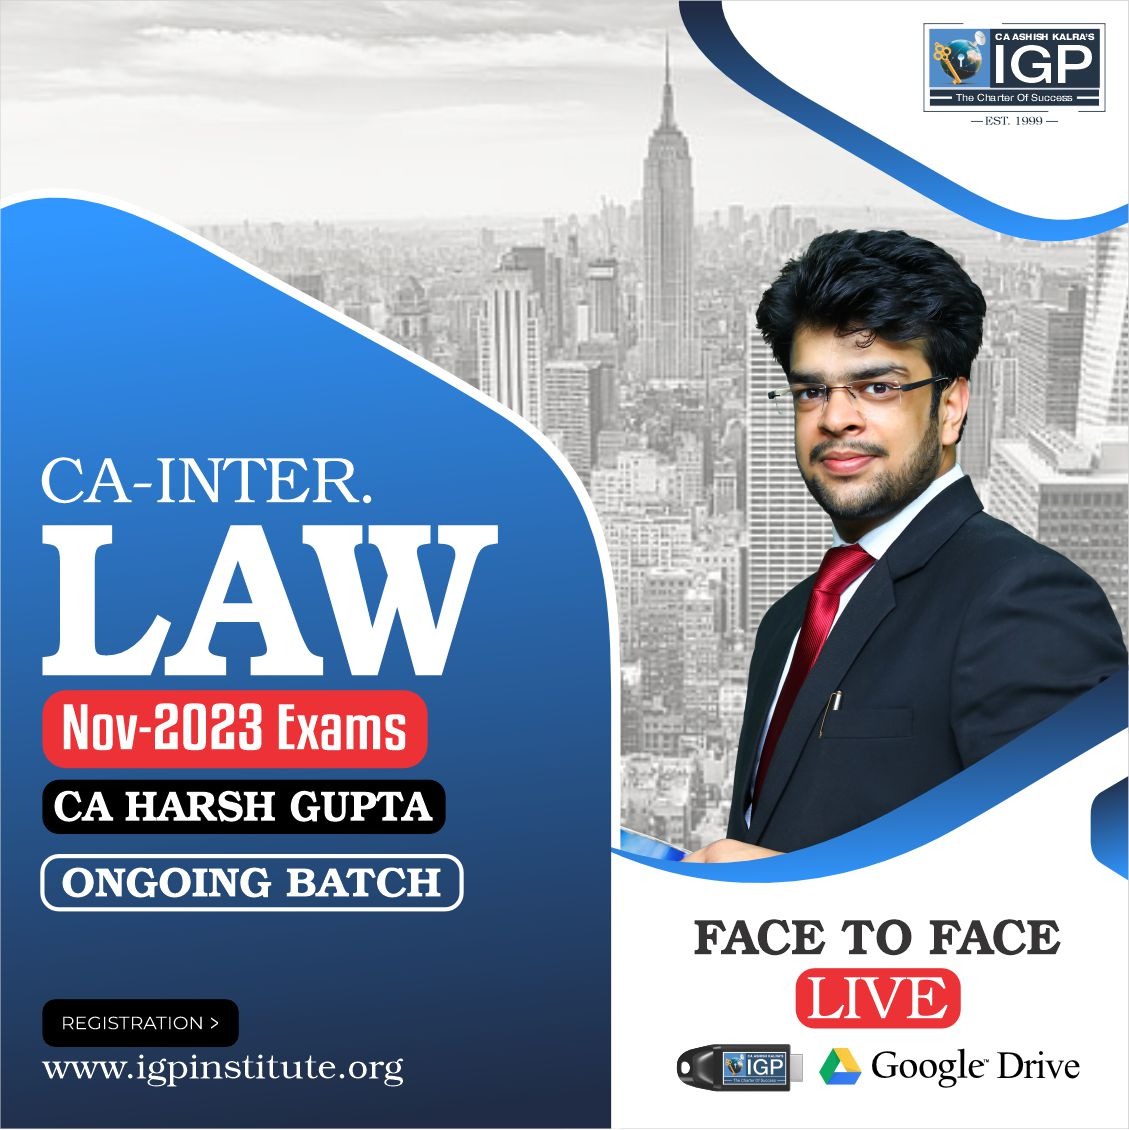 CA -INTER- Corporate Laws and Other Laws